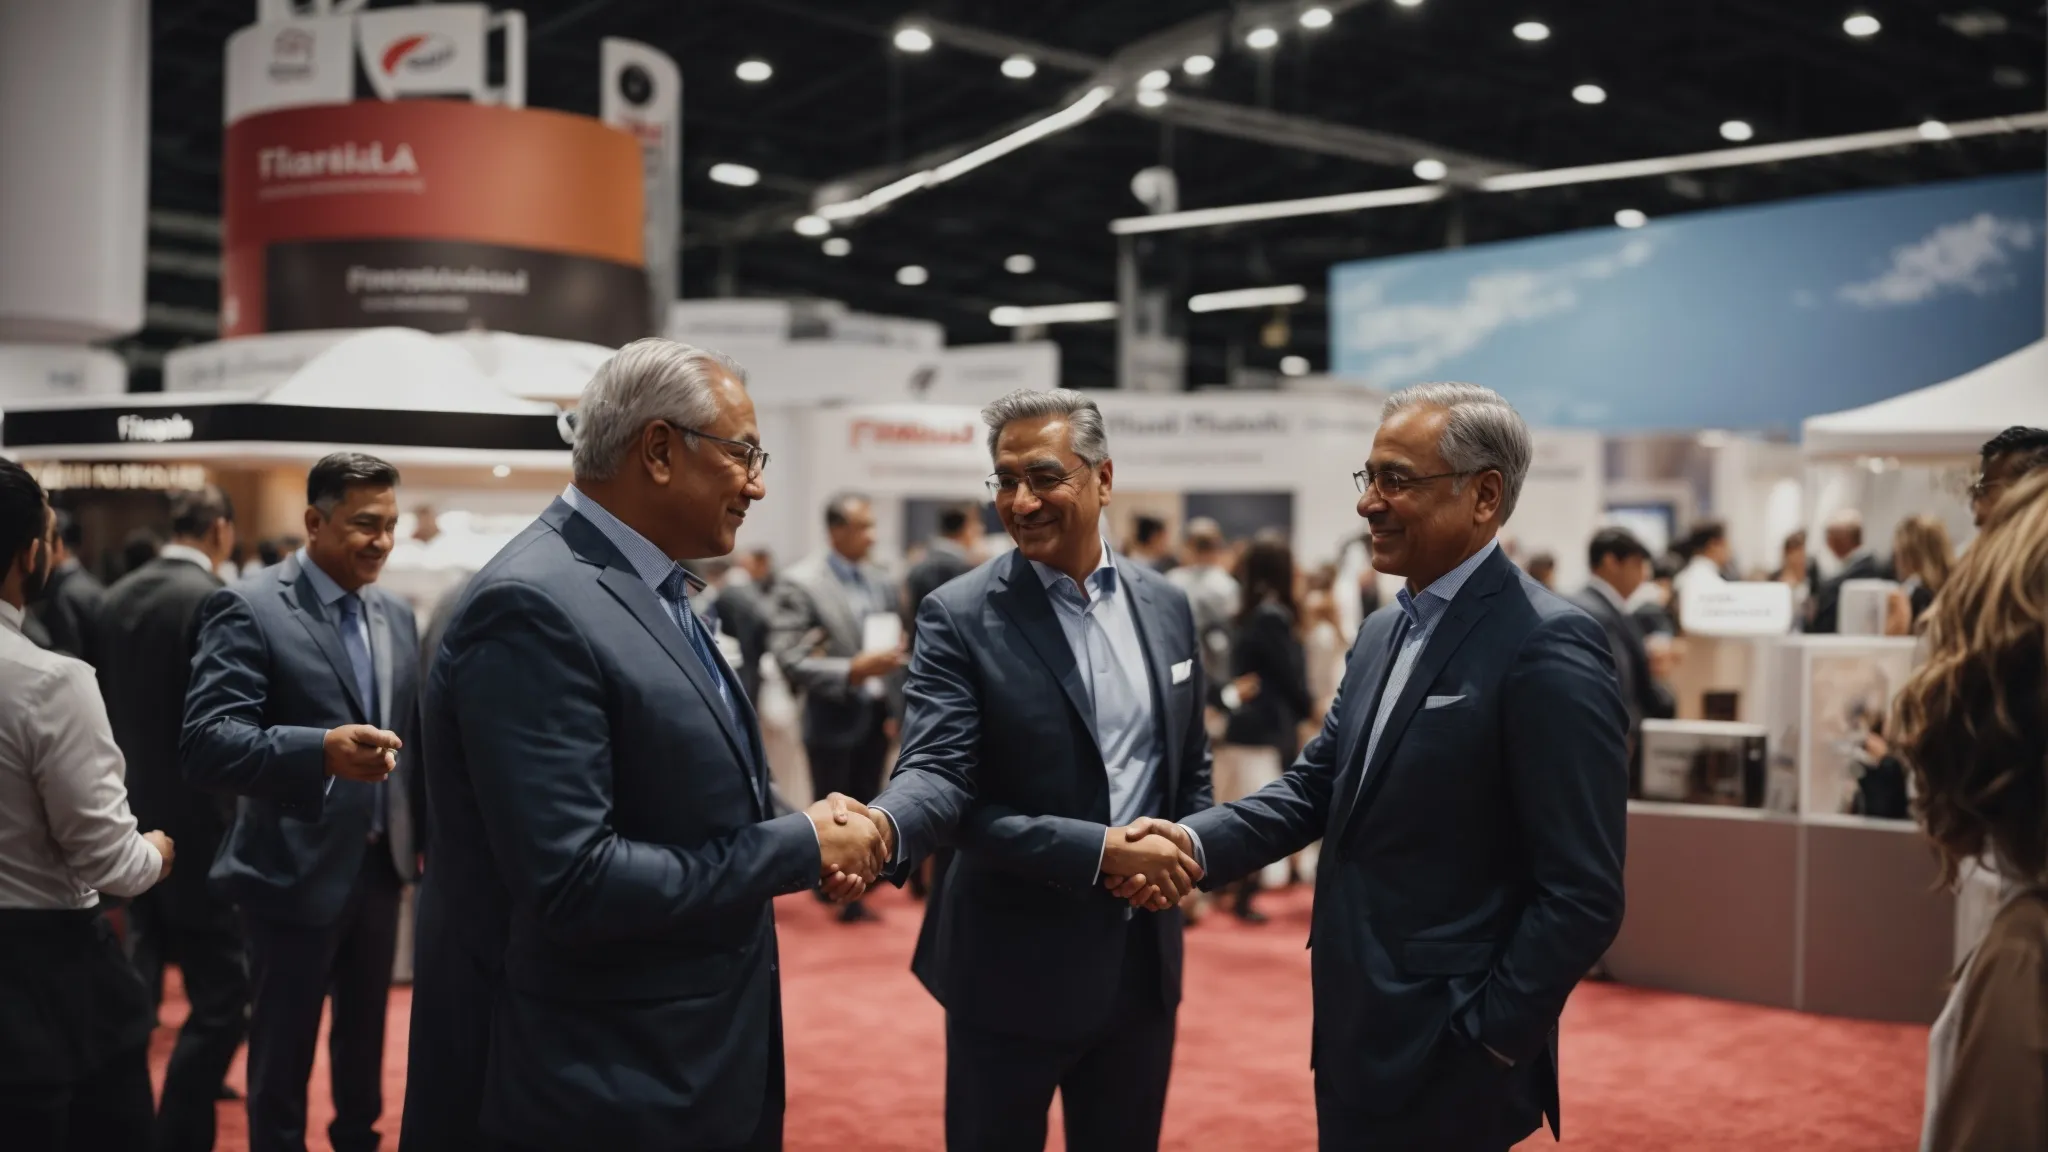 two ceos shaking hands in front of their respective trade show booths while visitors engage with product displays.